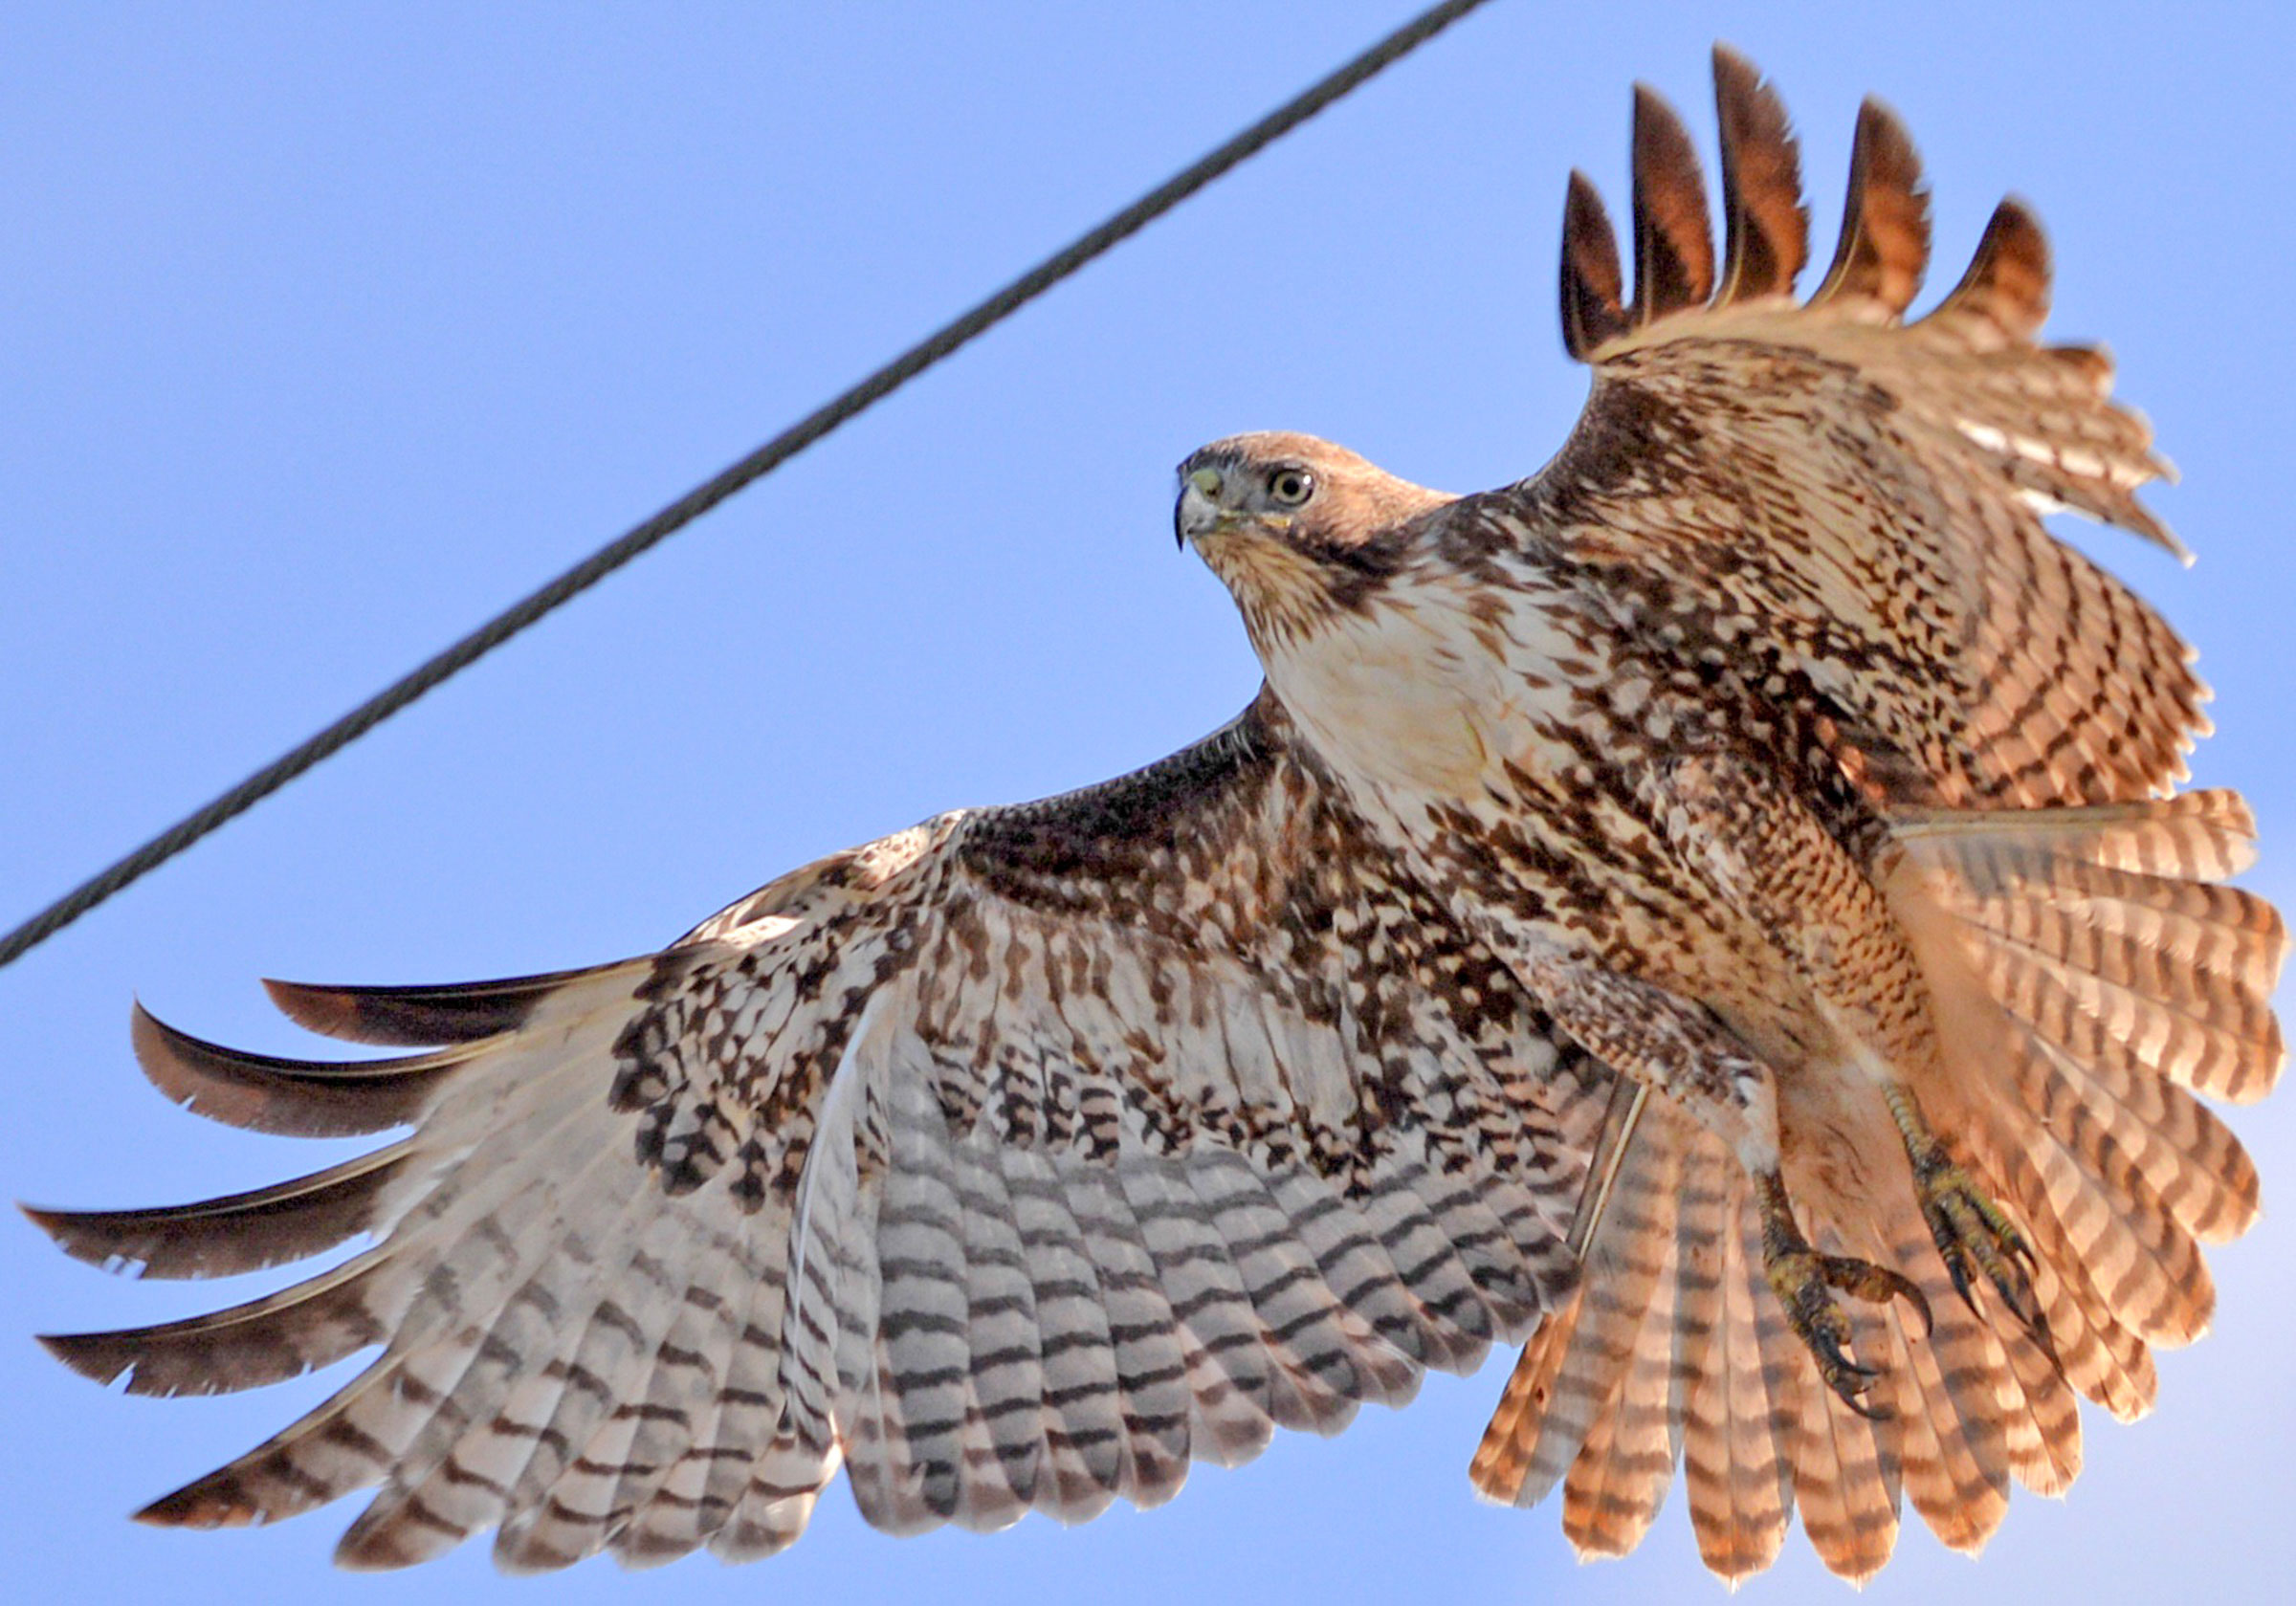 Six Quick Questions to Help You Identify Red-Tailed Hawks | Audubon